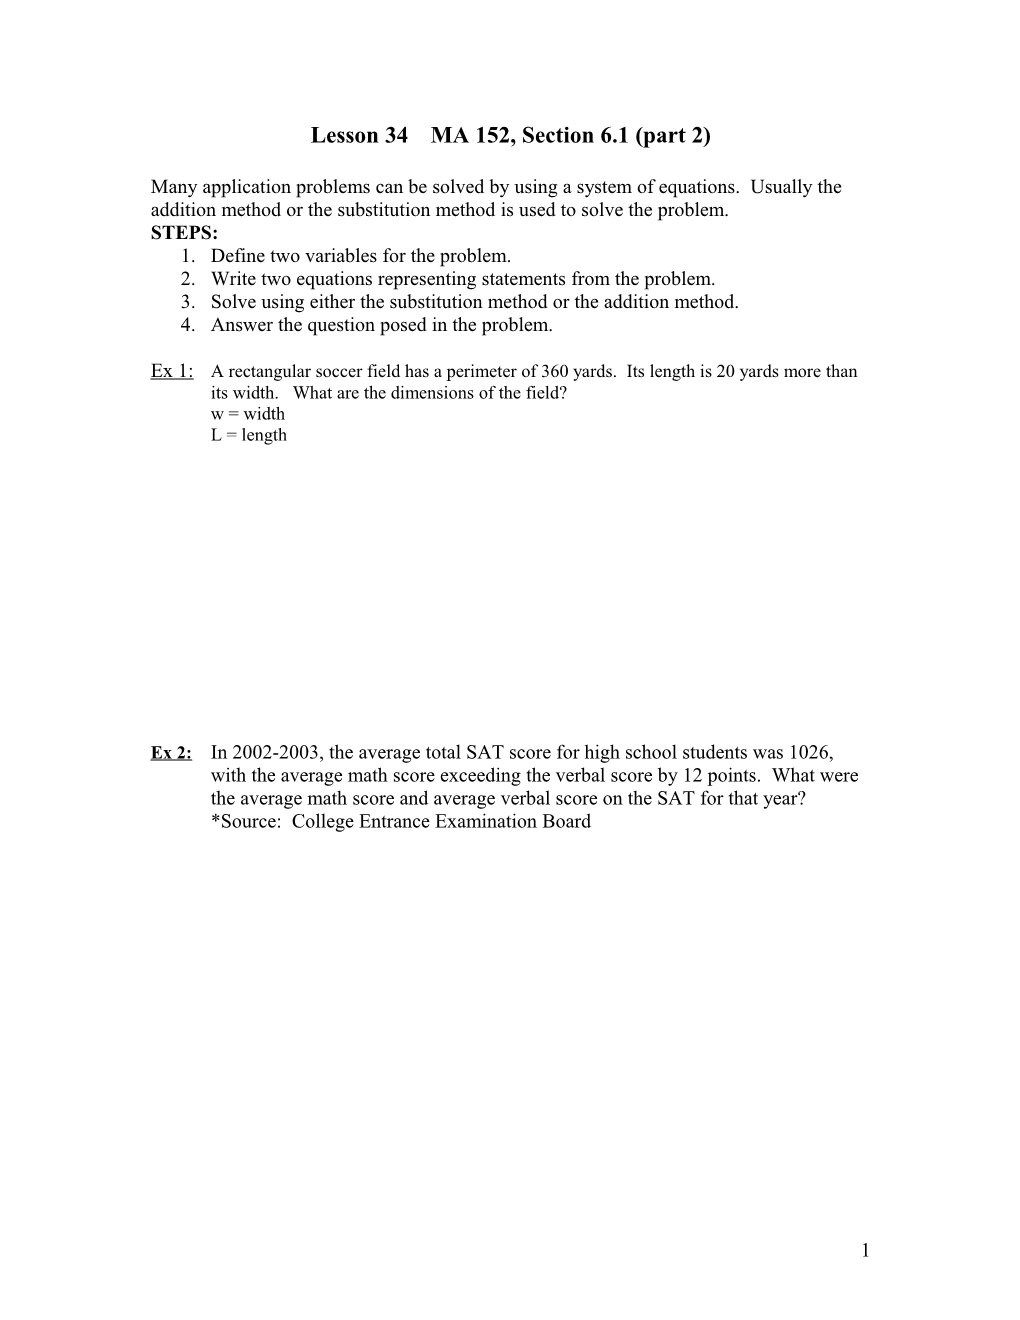 Lesson 34MA 152, Section 6.1 (Part 2)